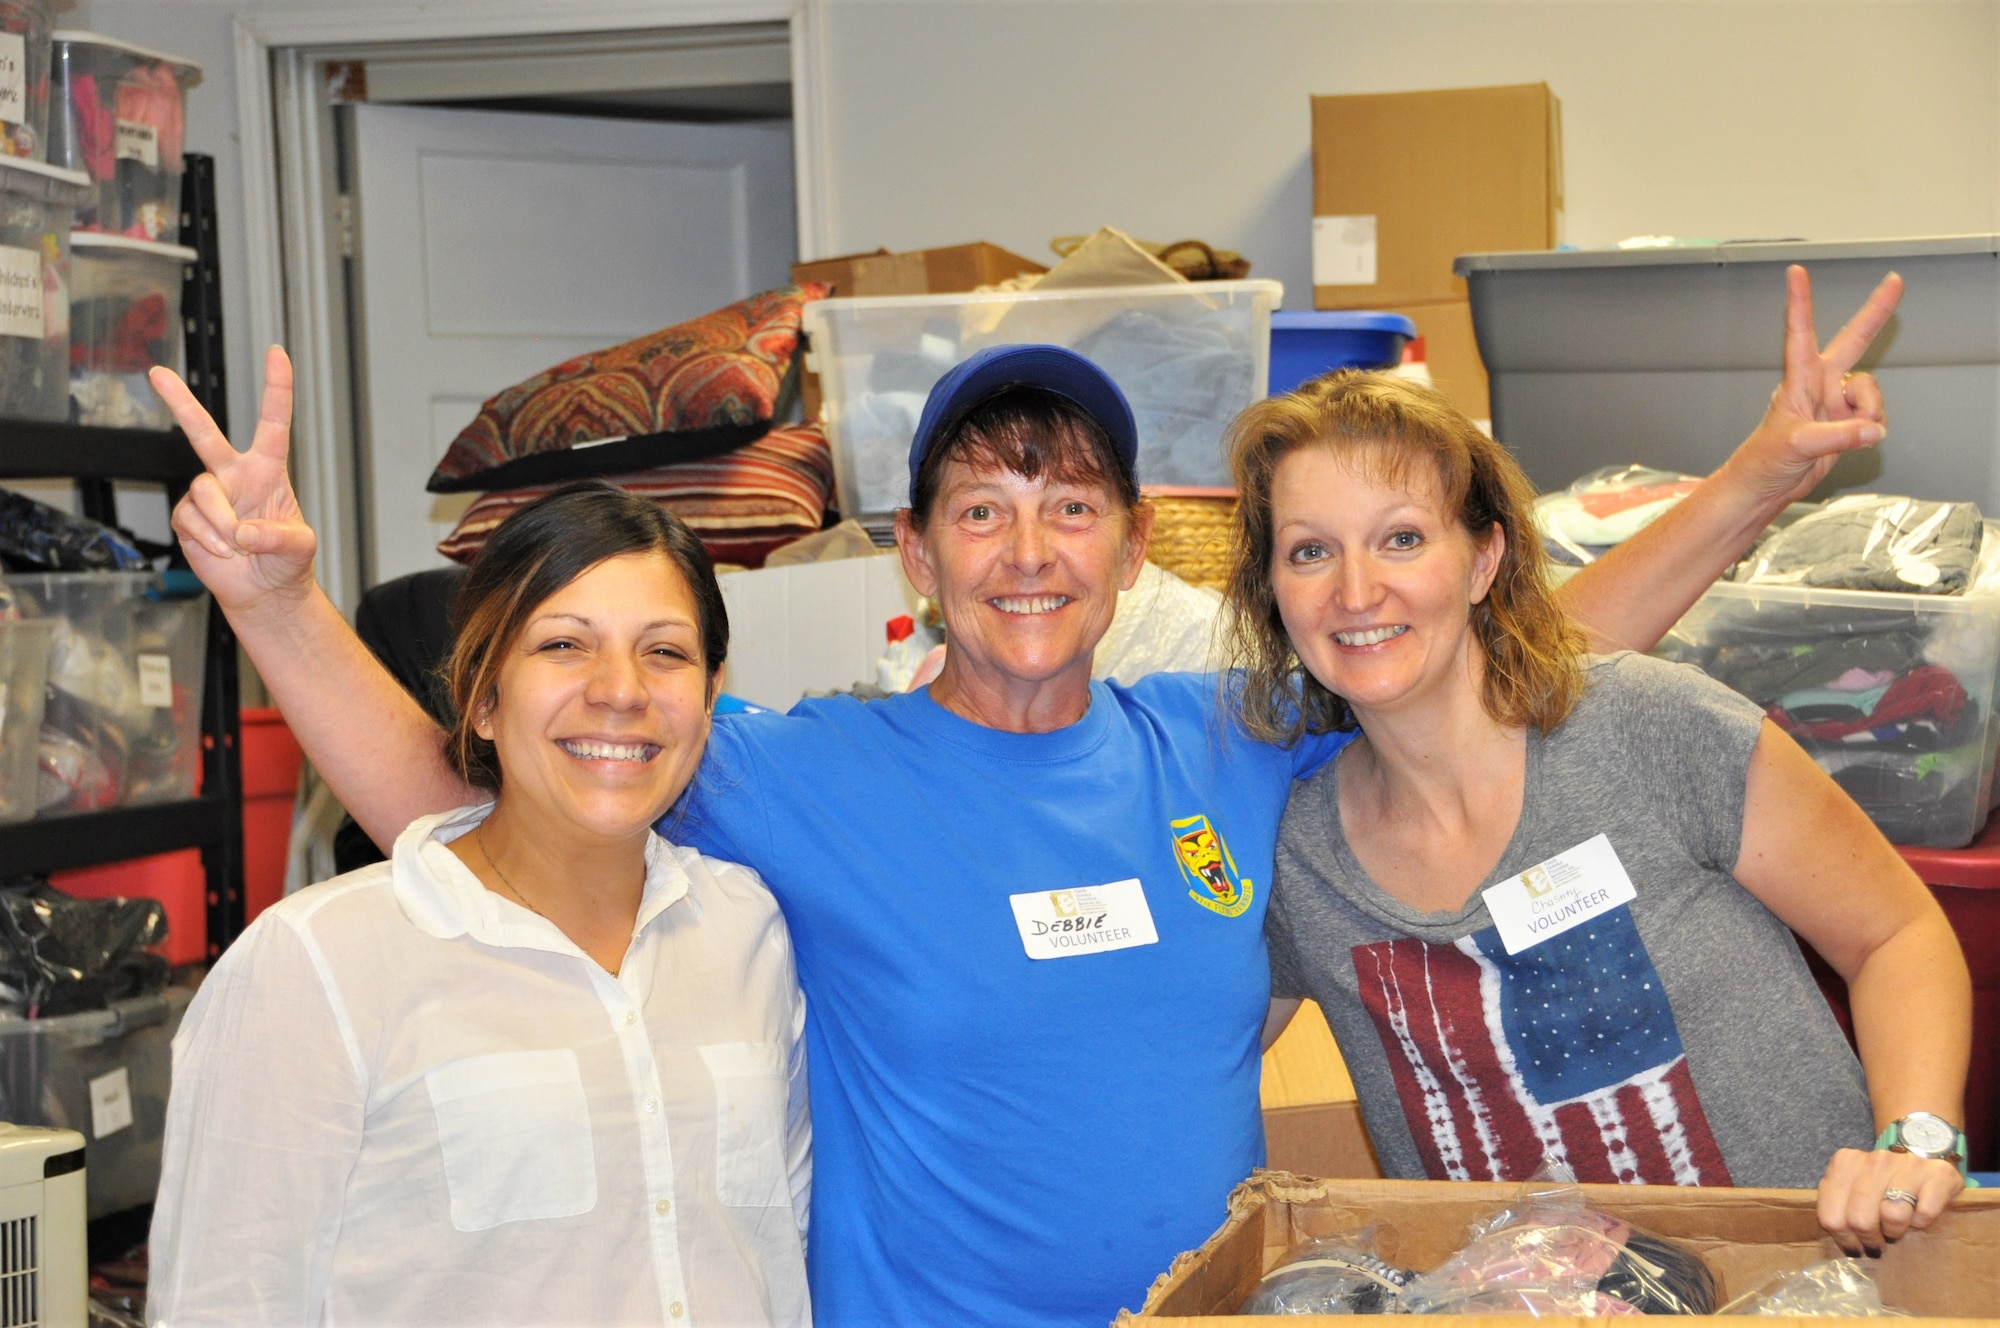 Priscilla Mendoza, San Antonio, Texas Family Violence Prevention Services/Battered Women and Children’s Shelter’s Donation Center assistant (left), and 340th Flying Training Group volunteers Debbie Gildea and Chastity Ramirez pose for a photo during the group's Sept. 11 community outreach event. Mendoza said the 16 boxes sorted and packed by 340th FTG members saved the center a week of work. (U.S. Air Force photo by Janis El Shabazz)